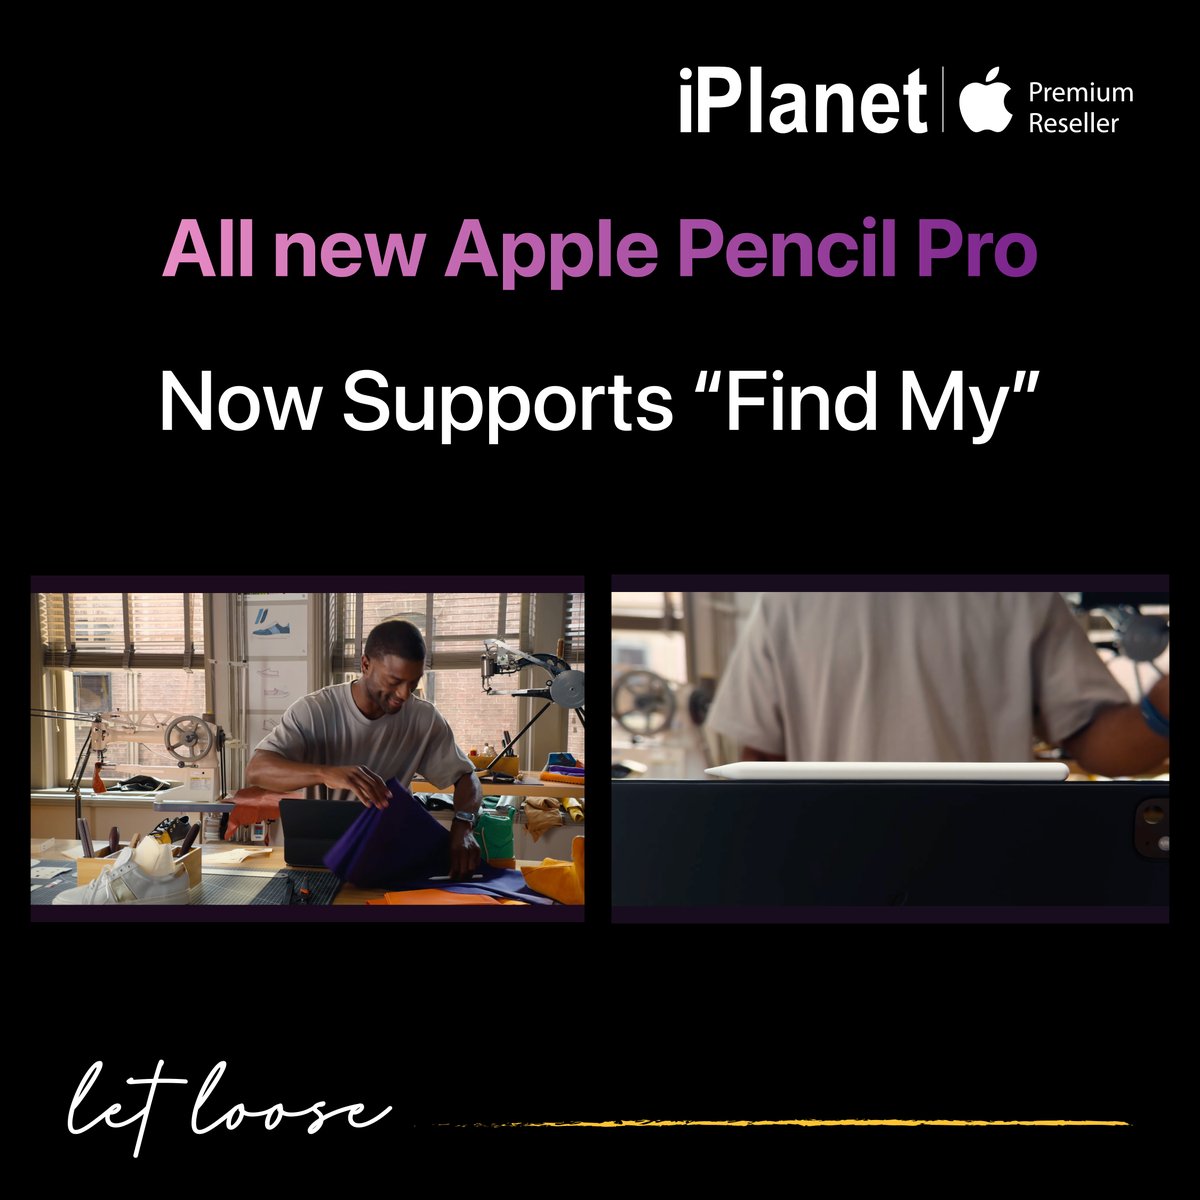 Elevate your creative experience with the all-new Apple Pencil Pro! This latest launch features low latency and newly added sensors to enhance your productivity.

#iPlanet #apple #appleevent #applepencilpro #applepencil #pencilart #newrelease #creativetools #applepencilart